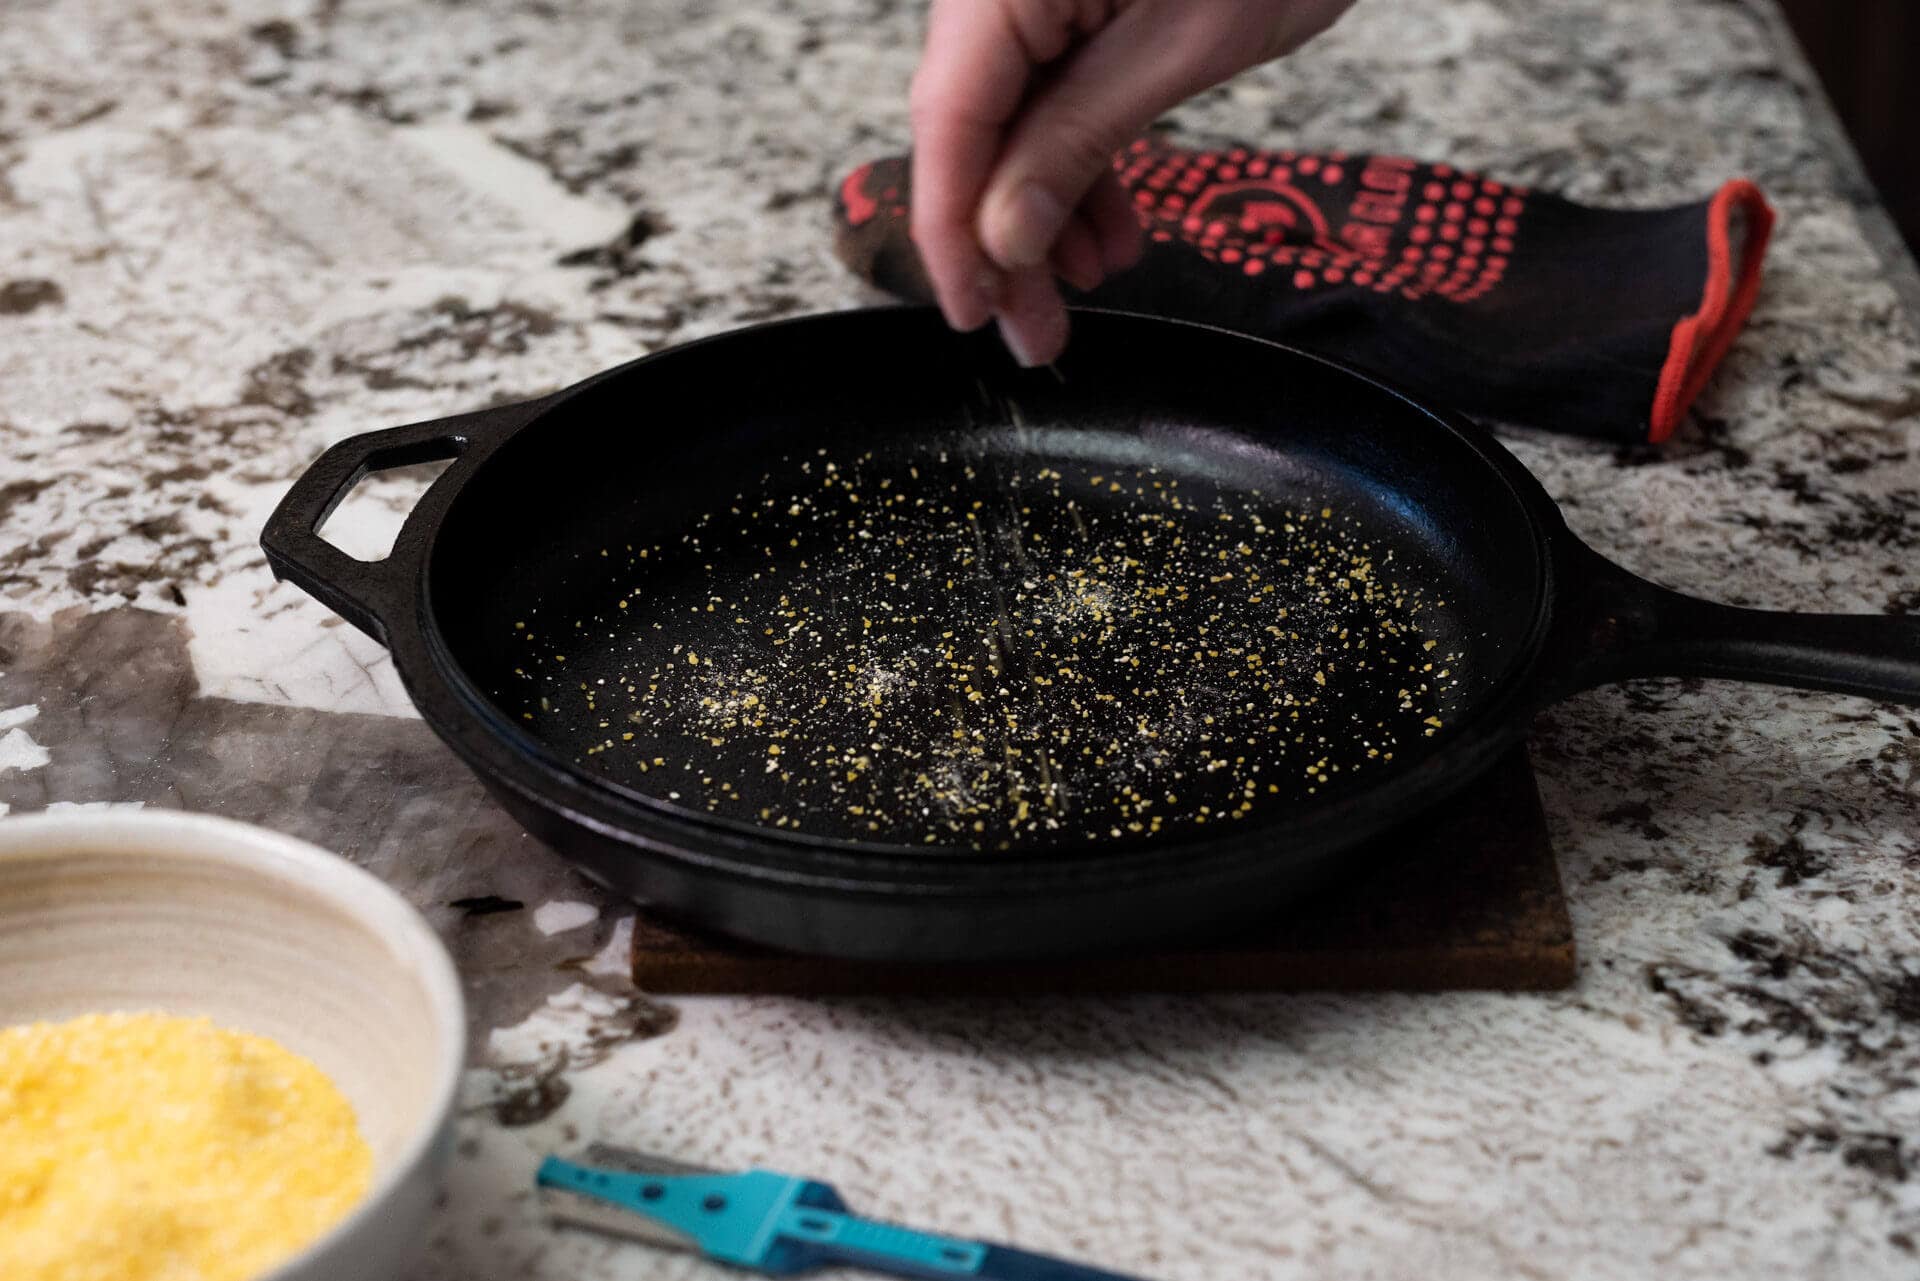 Sprinkle cornmeal into combo cooker (or Dutch oven)